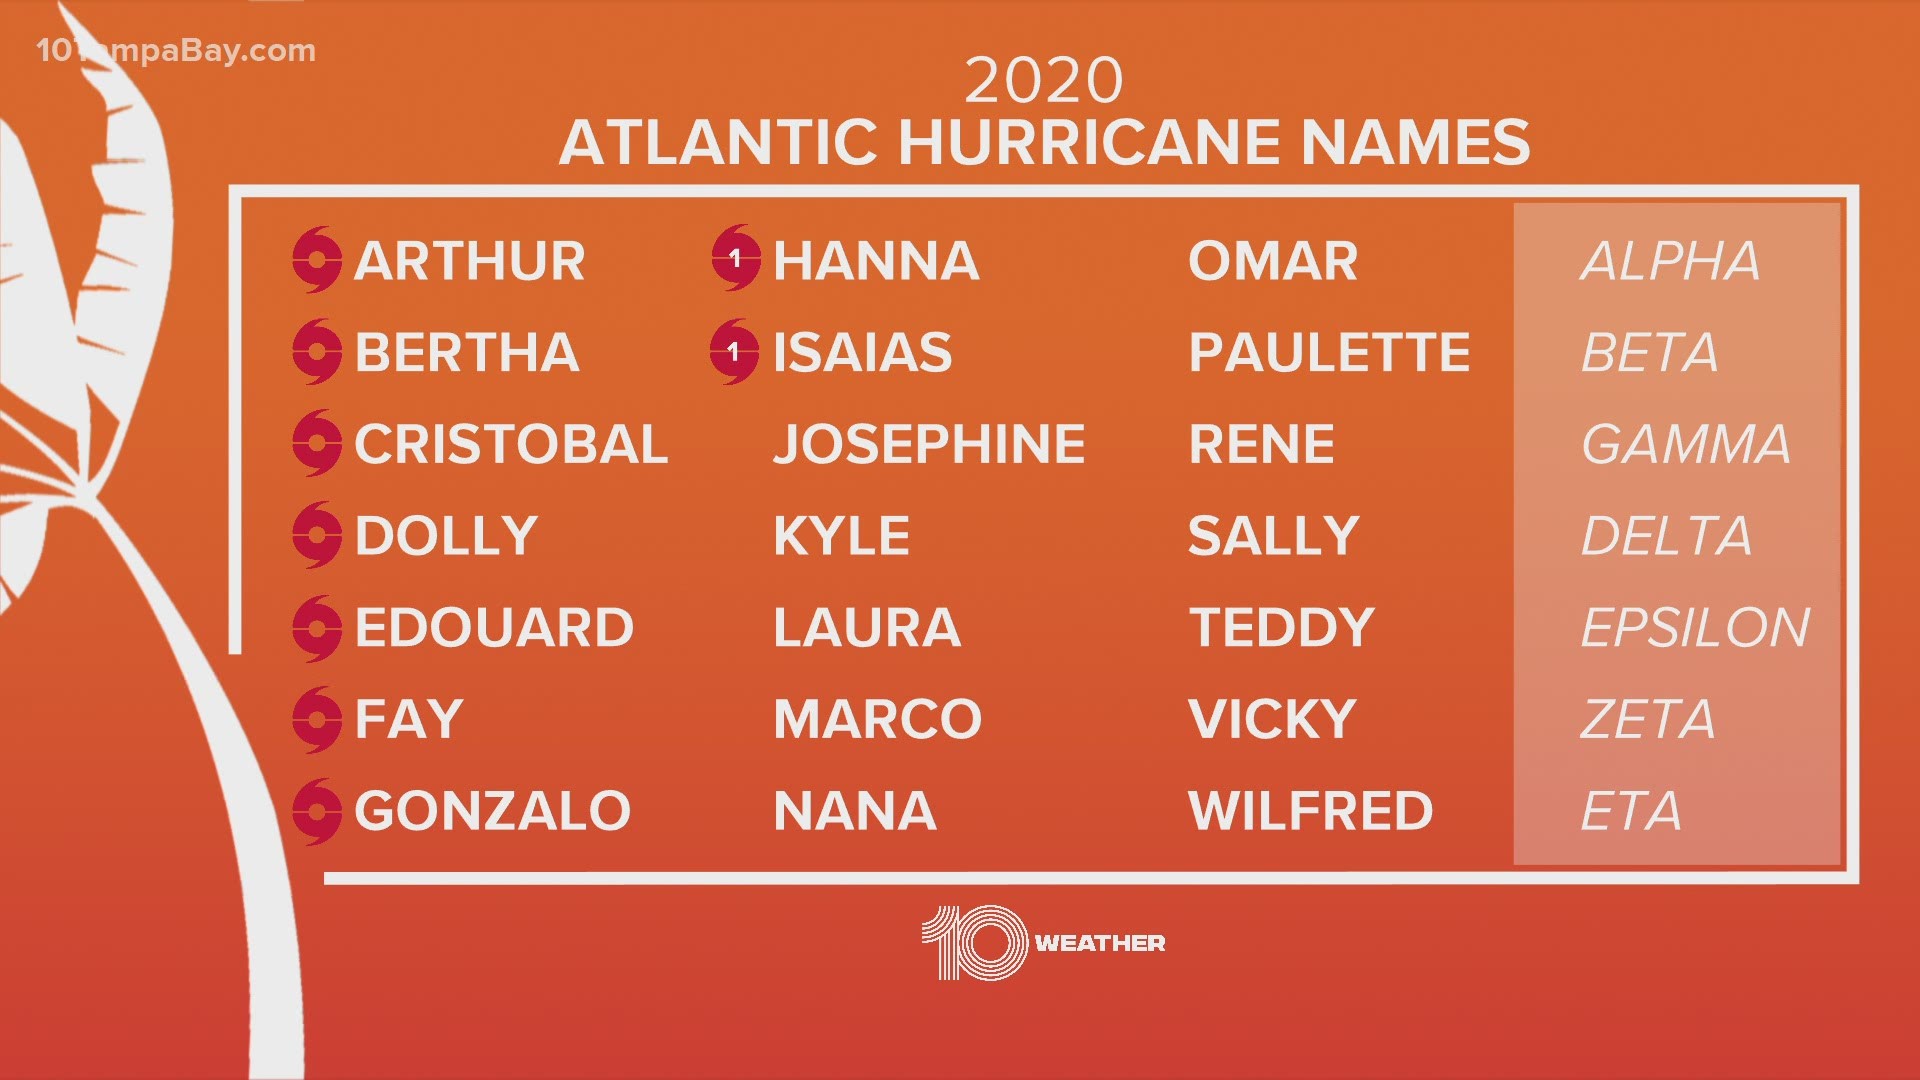 Only one other time we've had to move to the Greek alphabet to name storms.